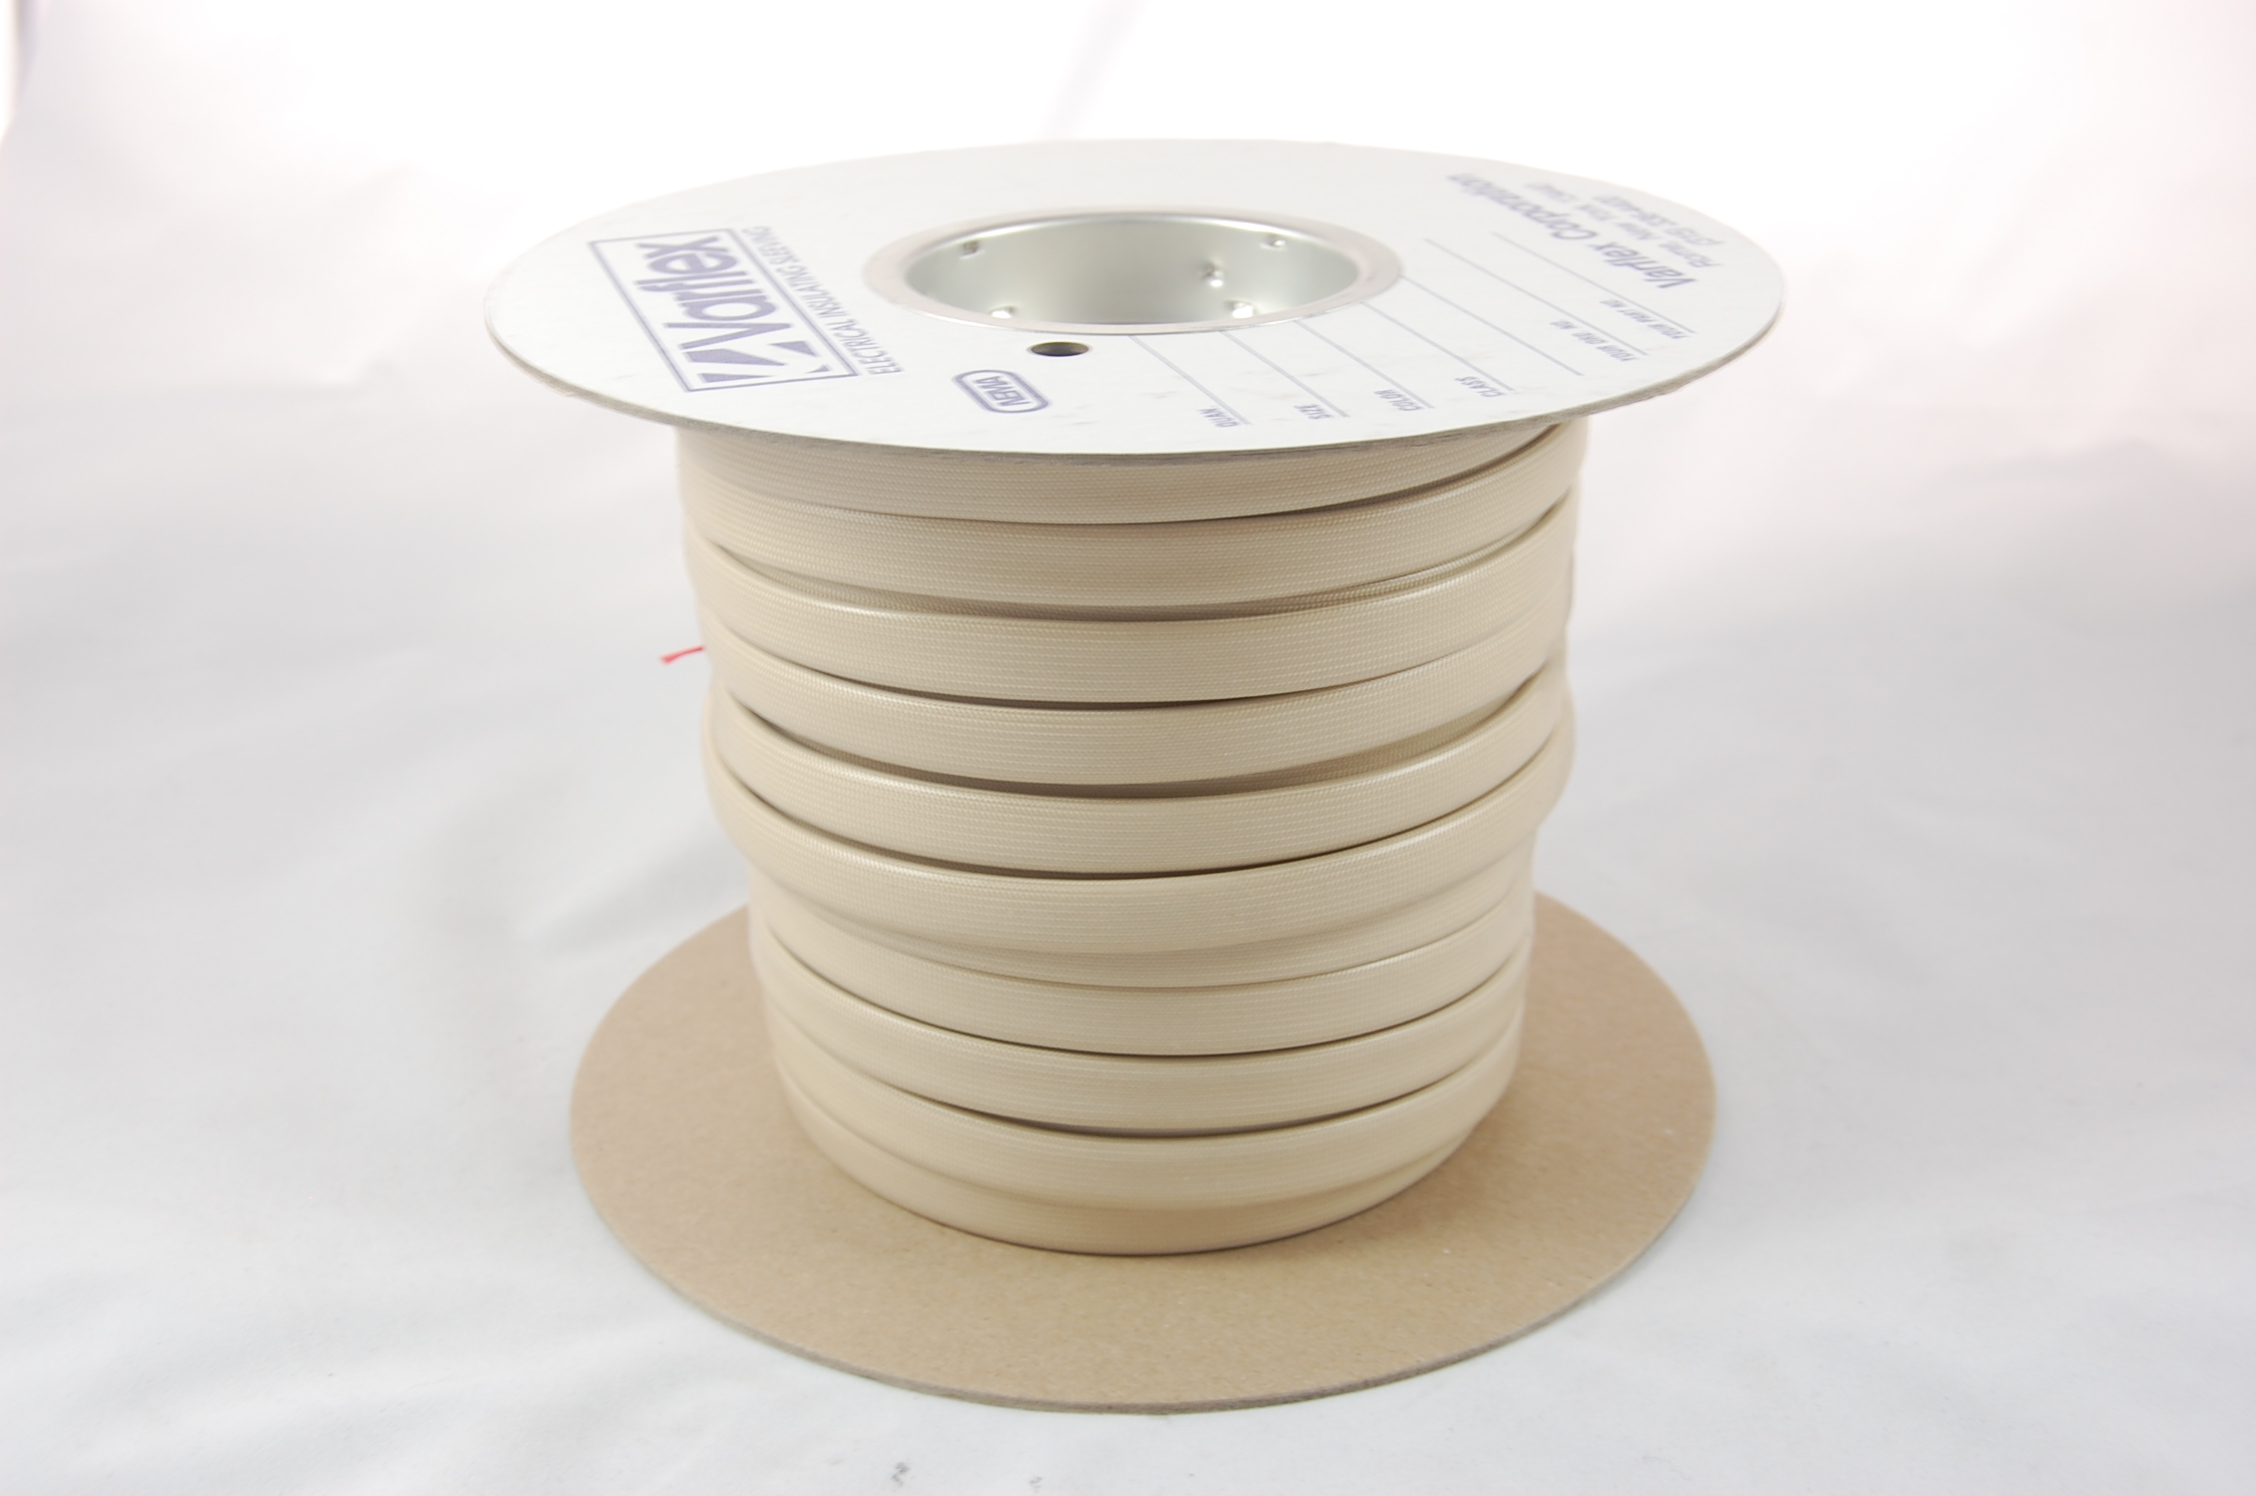 #6 AWG Varglas Silicone Rubber Grade H-A-1 (8000V) High Temperature Silicone Rubber Coated Braided Fiberglass Sleeving 200°C, natural, 150 FT per spool